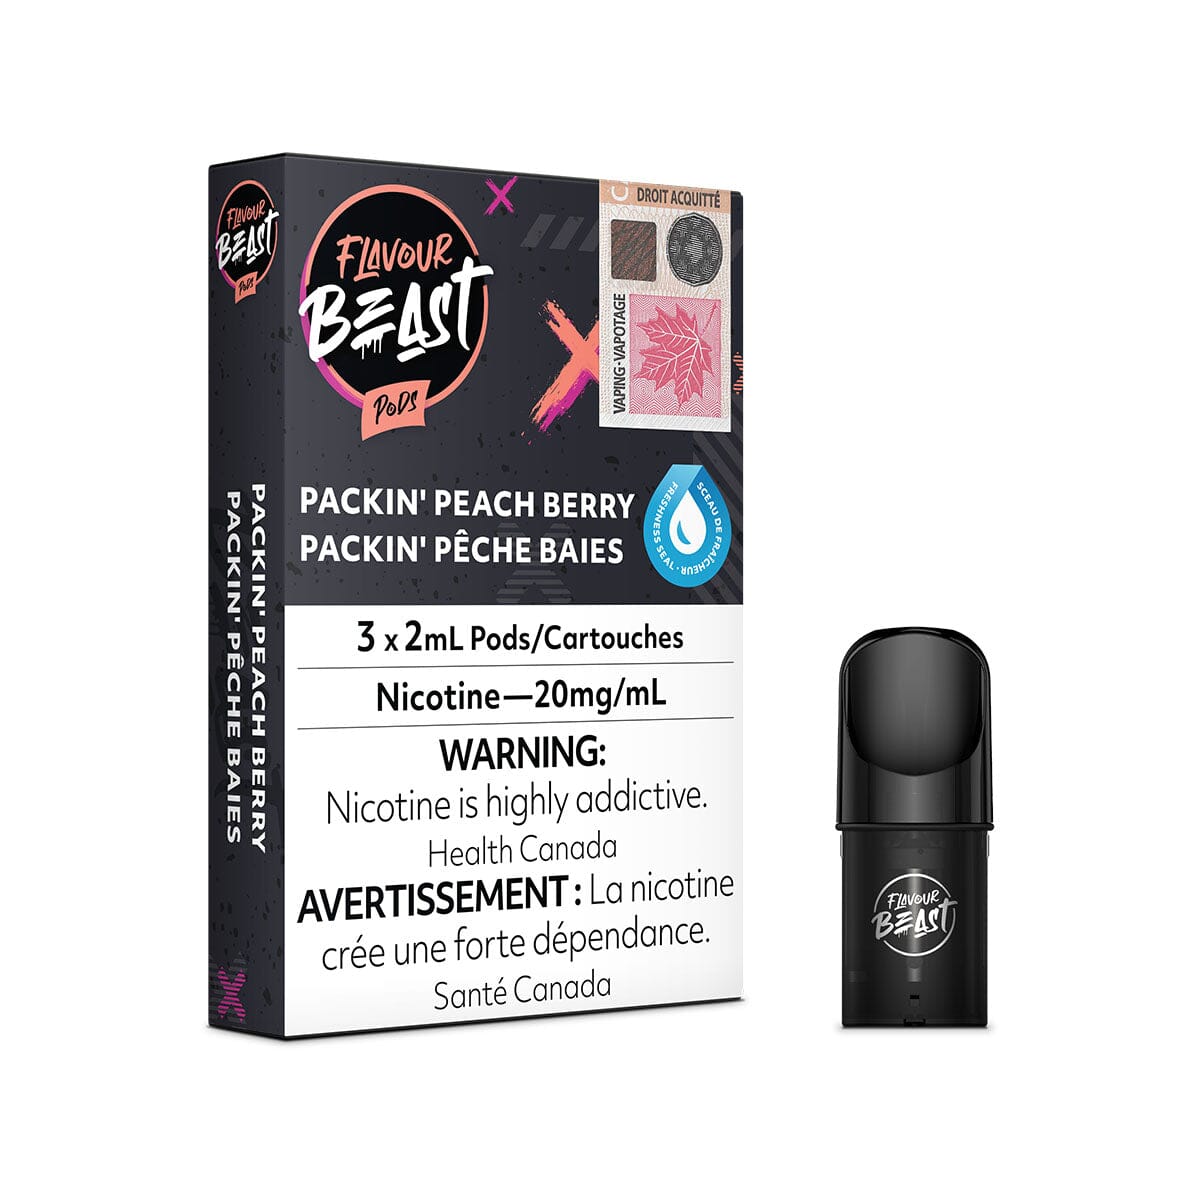 STLTH Compatible Flavour Beast Packin' Peach Berry Vape Pods Pre-filled Pod Flavour Beast 